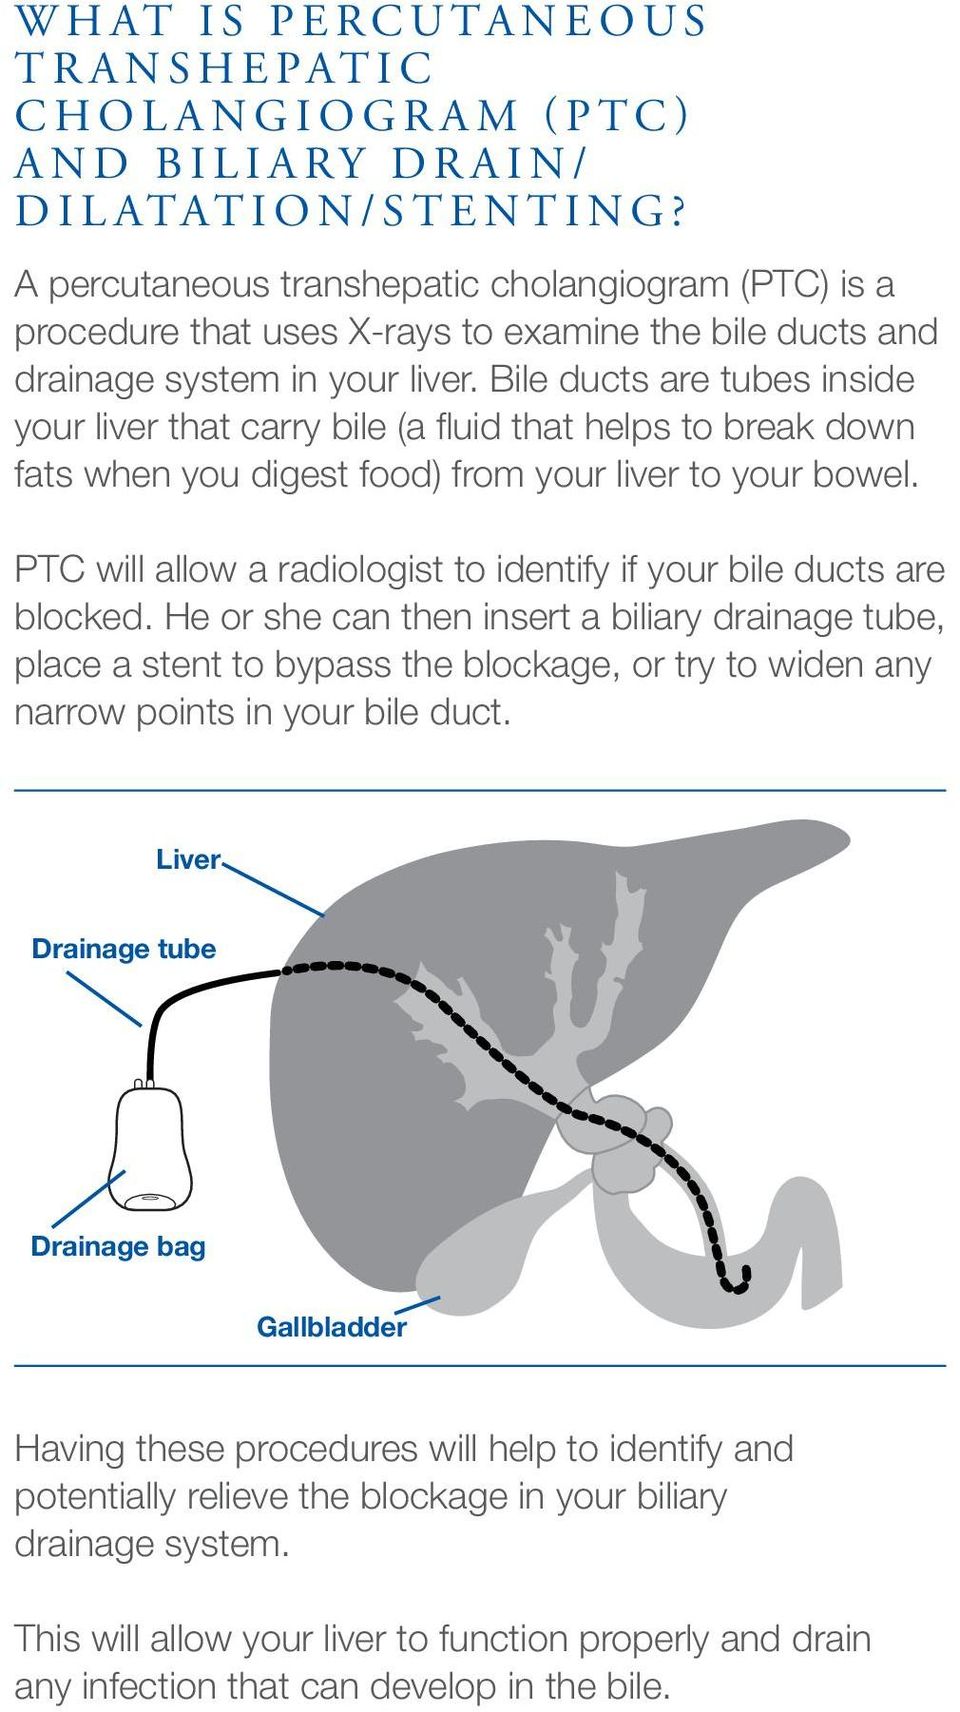 Bile ducts are tubes inside your liver that carry bile (a fluid that helps to break down fats when you digest food) from your liver to your bowel.